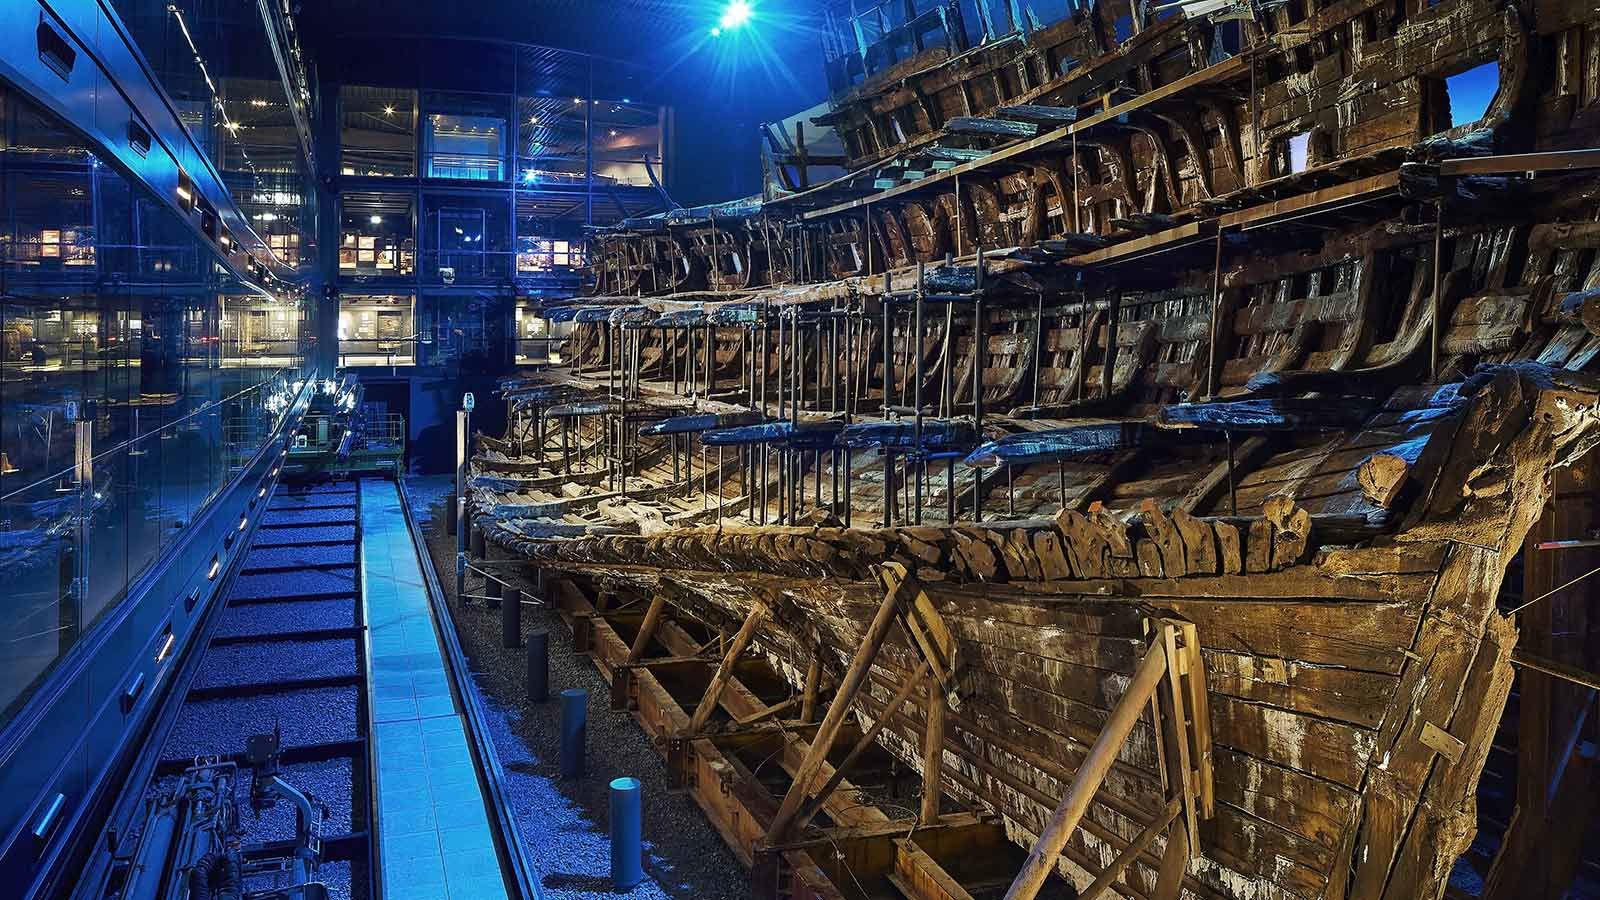 Mary Rose Museum - Mace Group